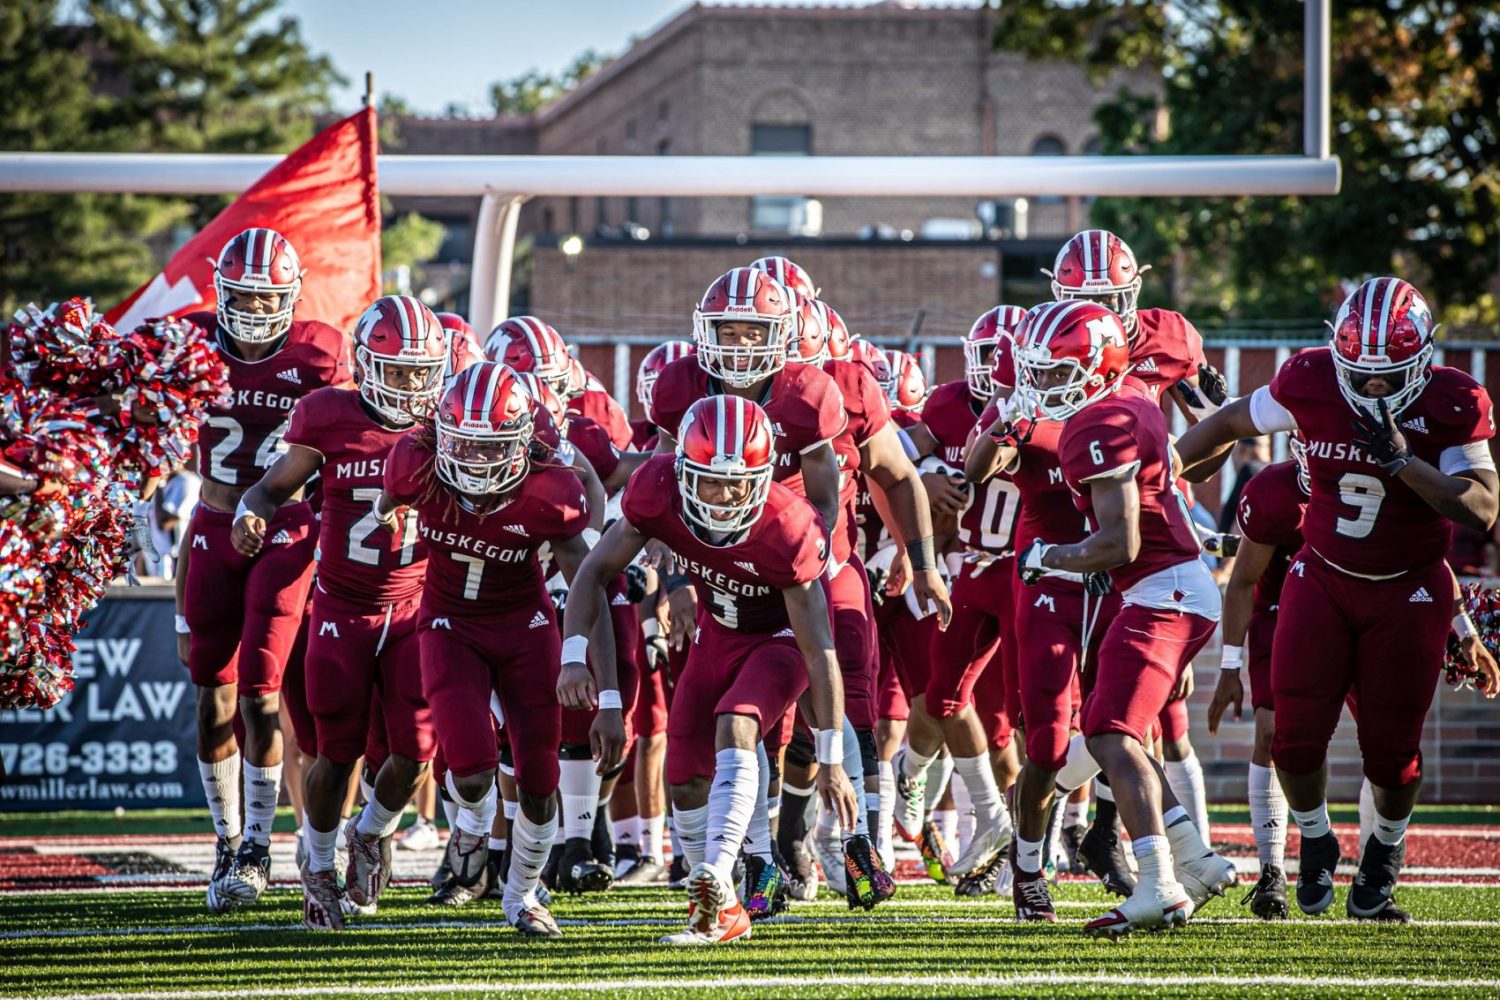 Muskegon starts slow in lopsided loss to state power Rockford